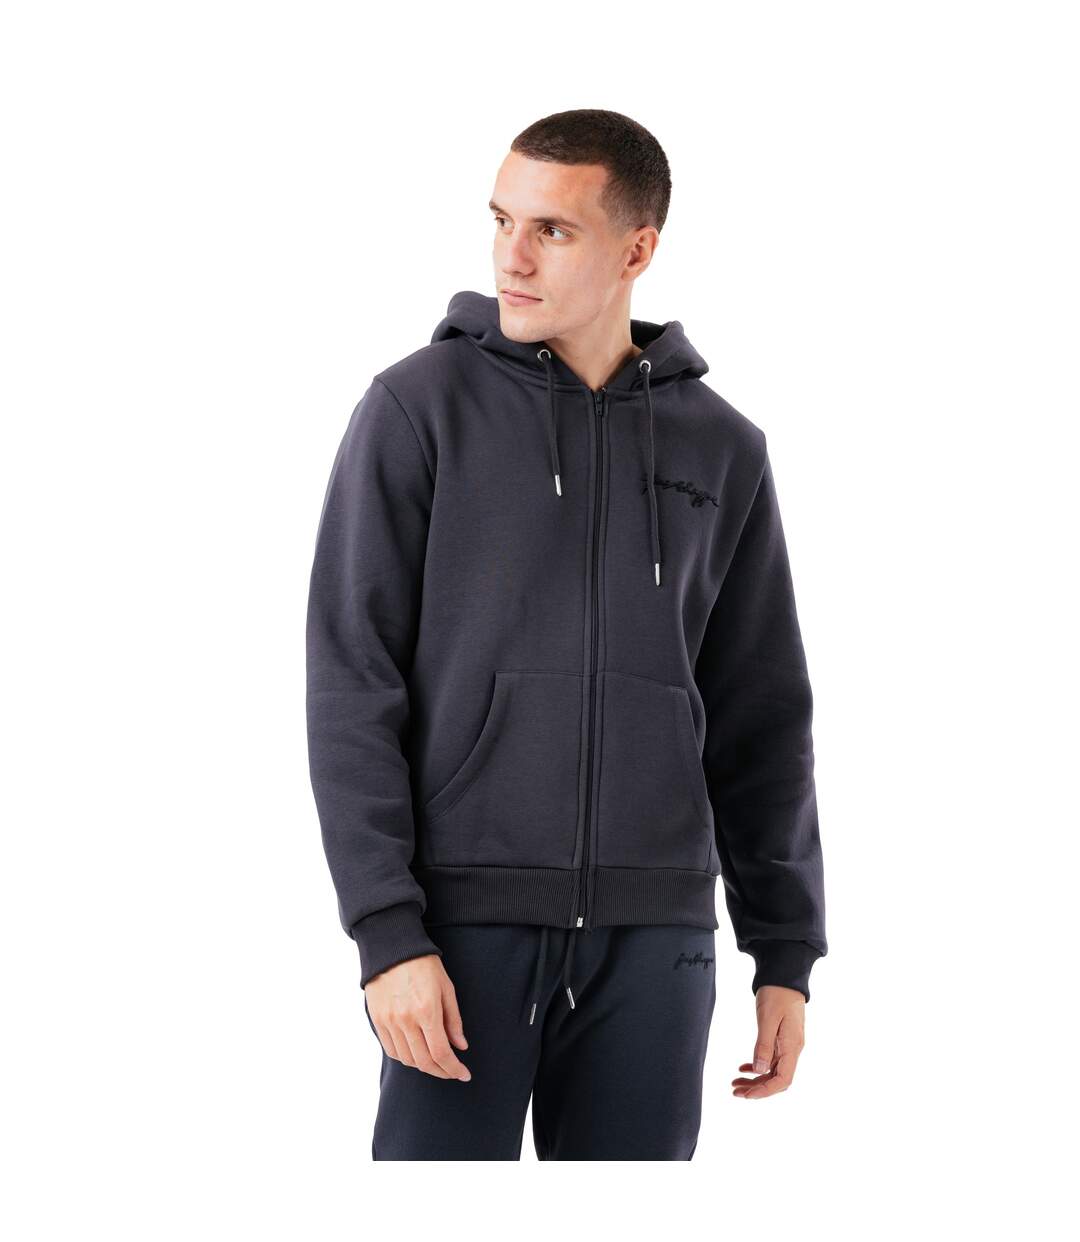 Hype Mens Zipped Oversized Hoodie (Charcoal) - UTHY5890